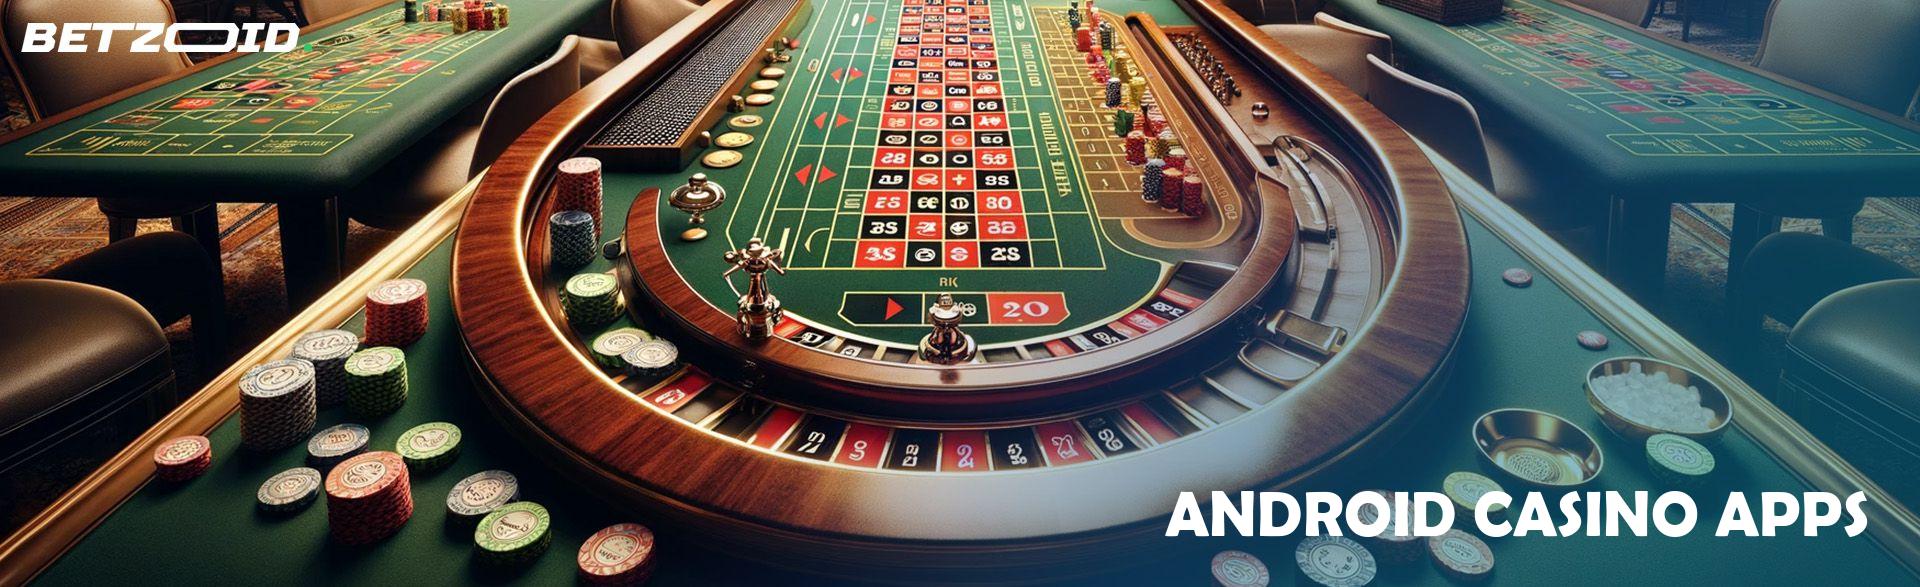 Android Casino Apps.